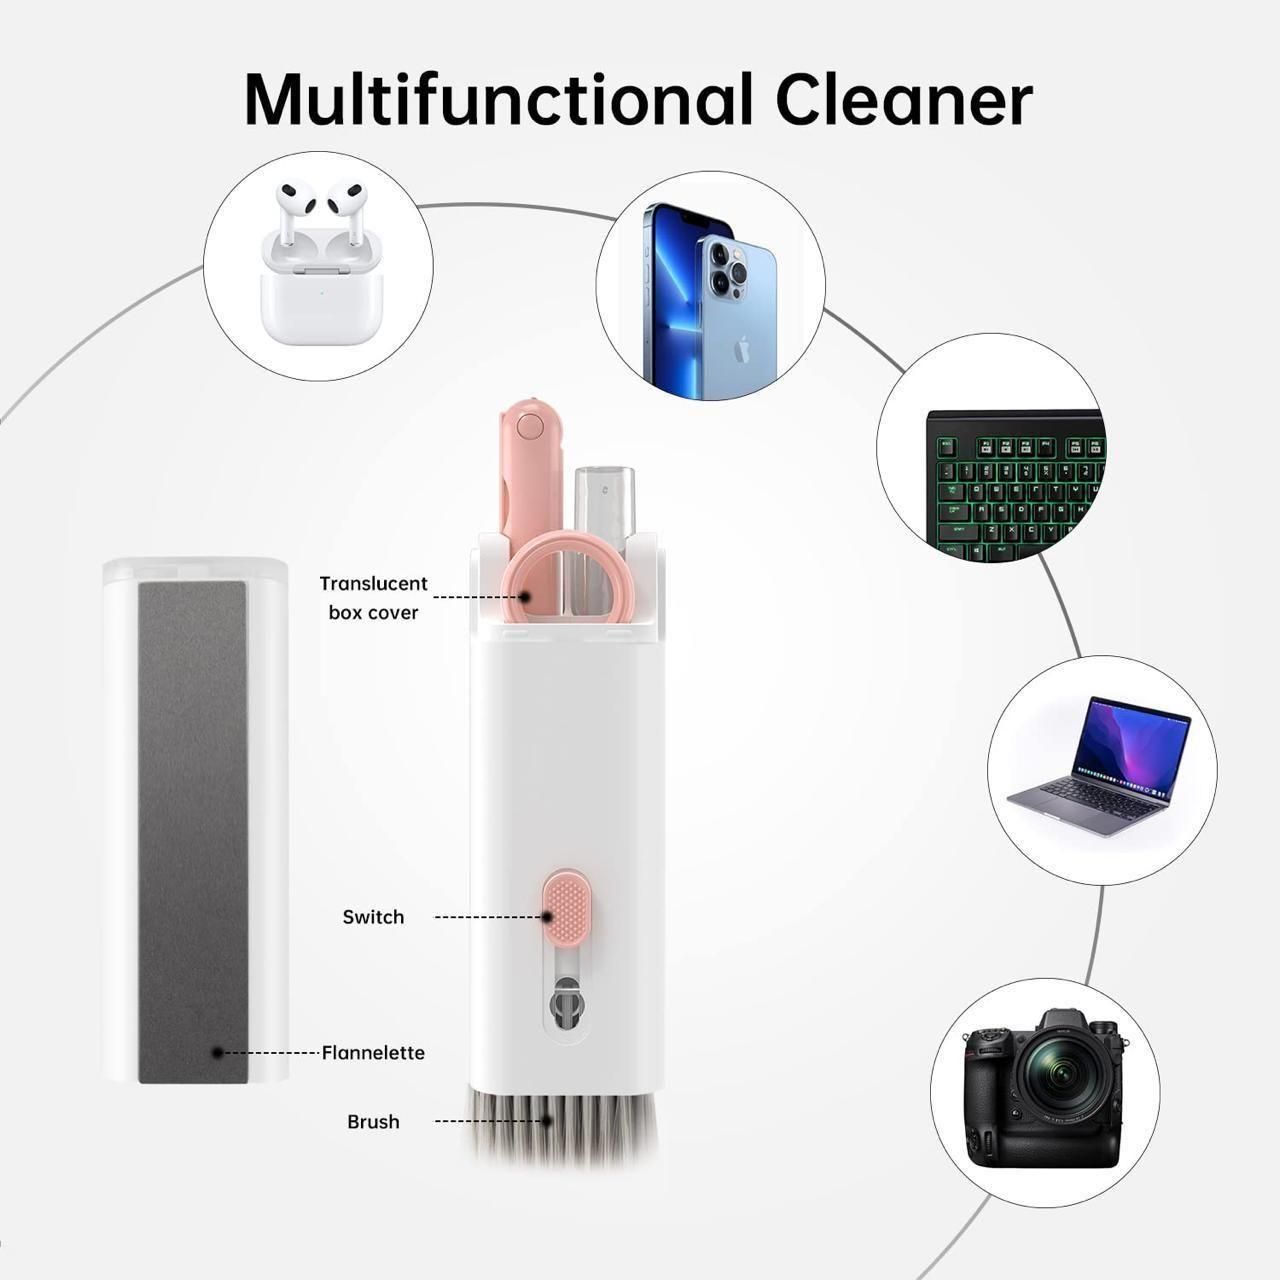 7 in 1 Electronic Cleaner Kit with Brush - Wonderful Supply